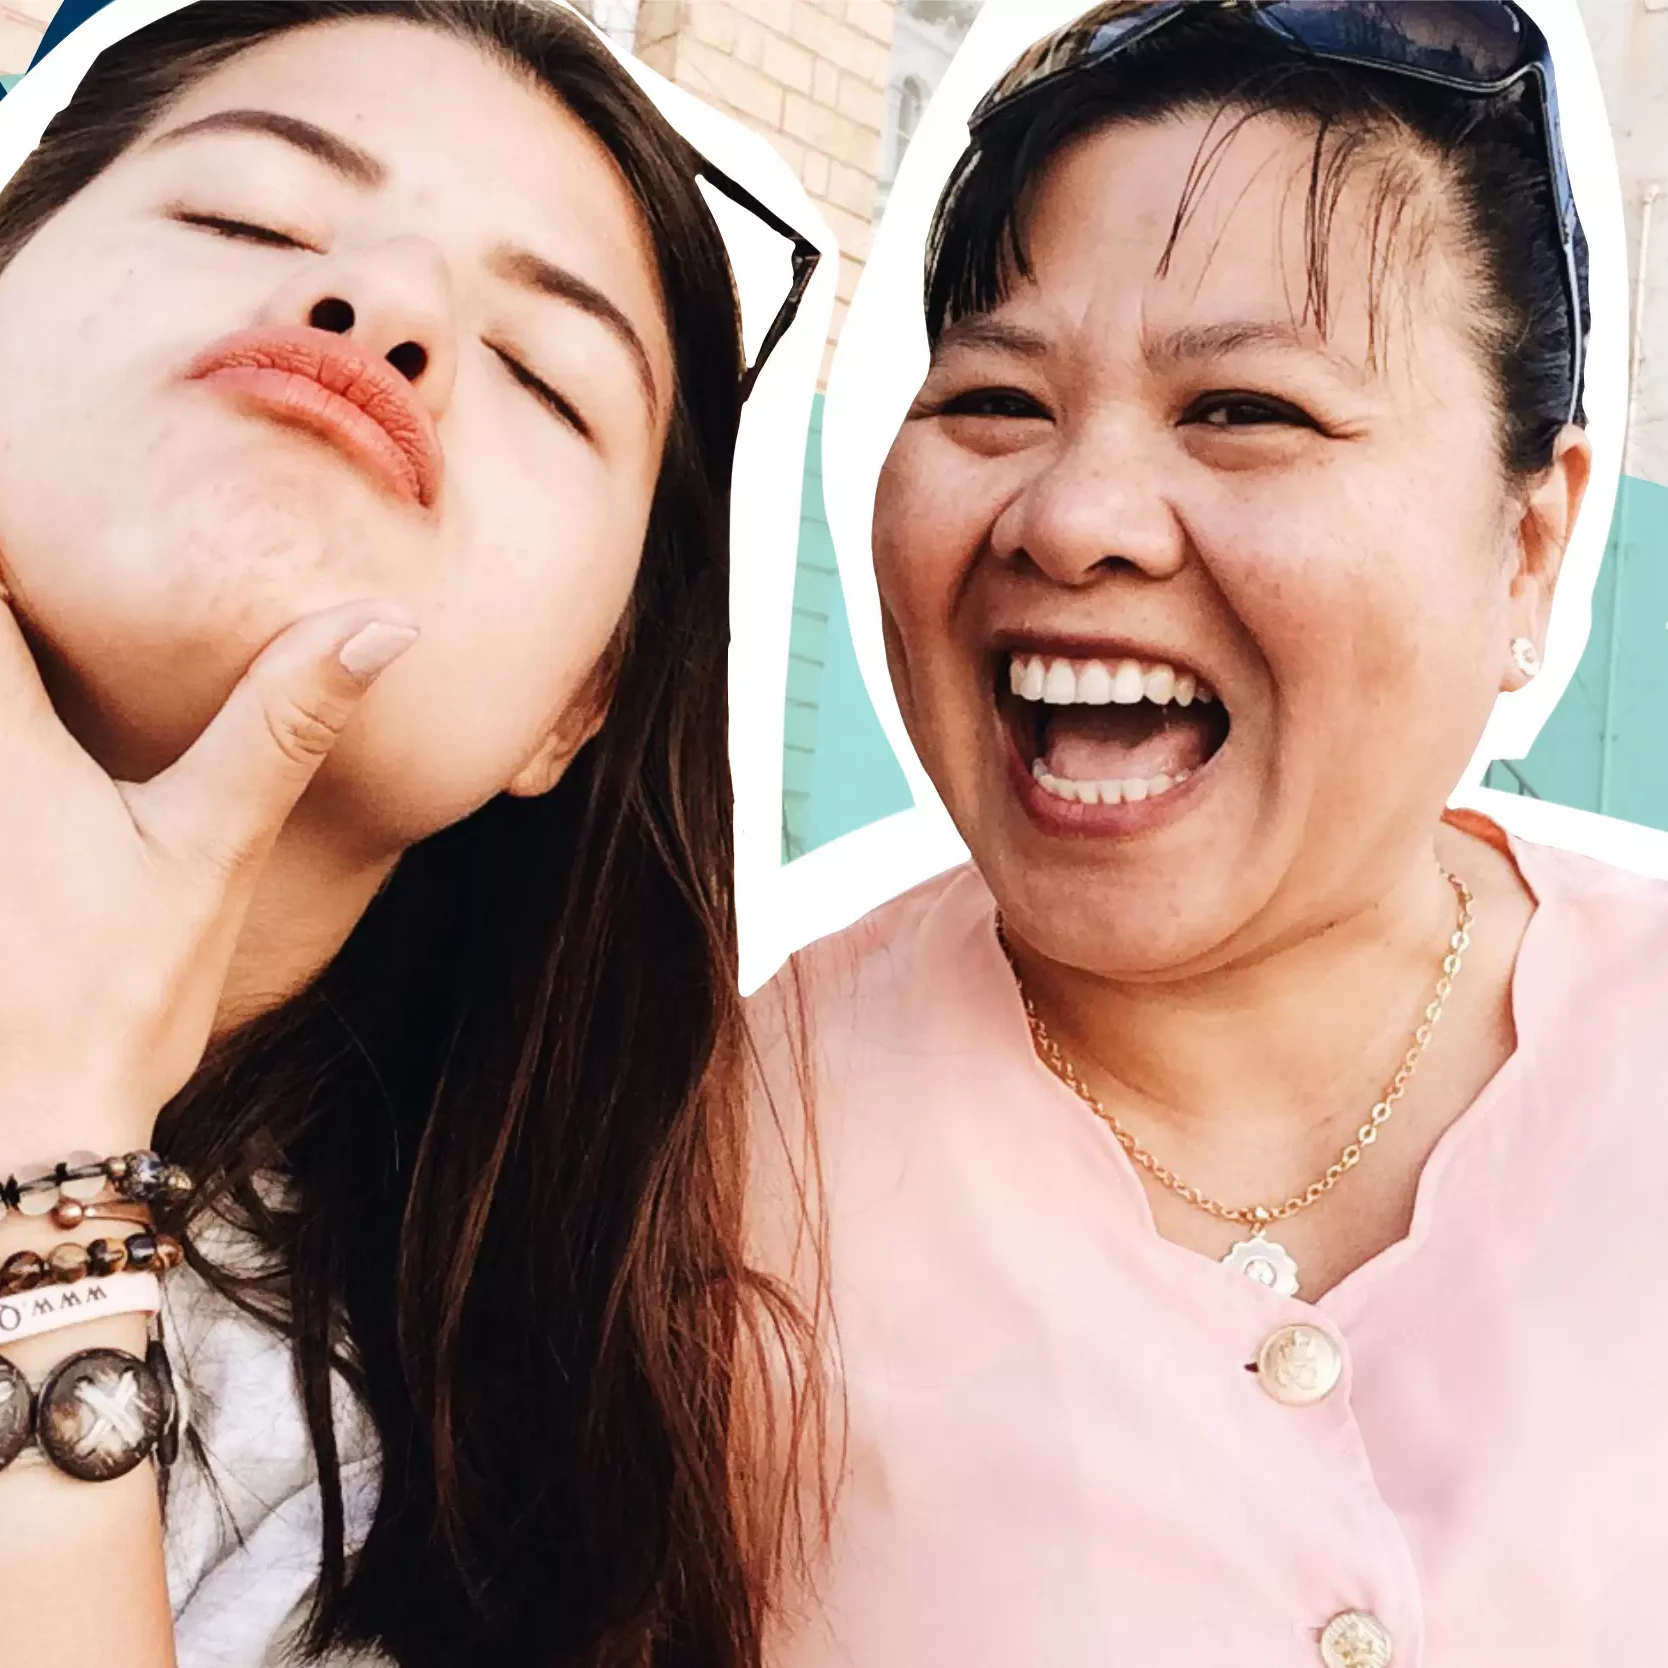 Mother and daughter take a selfie. Daughter boasts duck lips and mother grins with open mouth smile